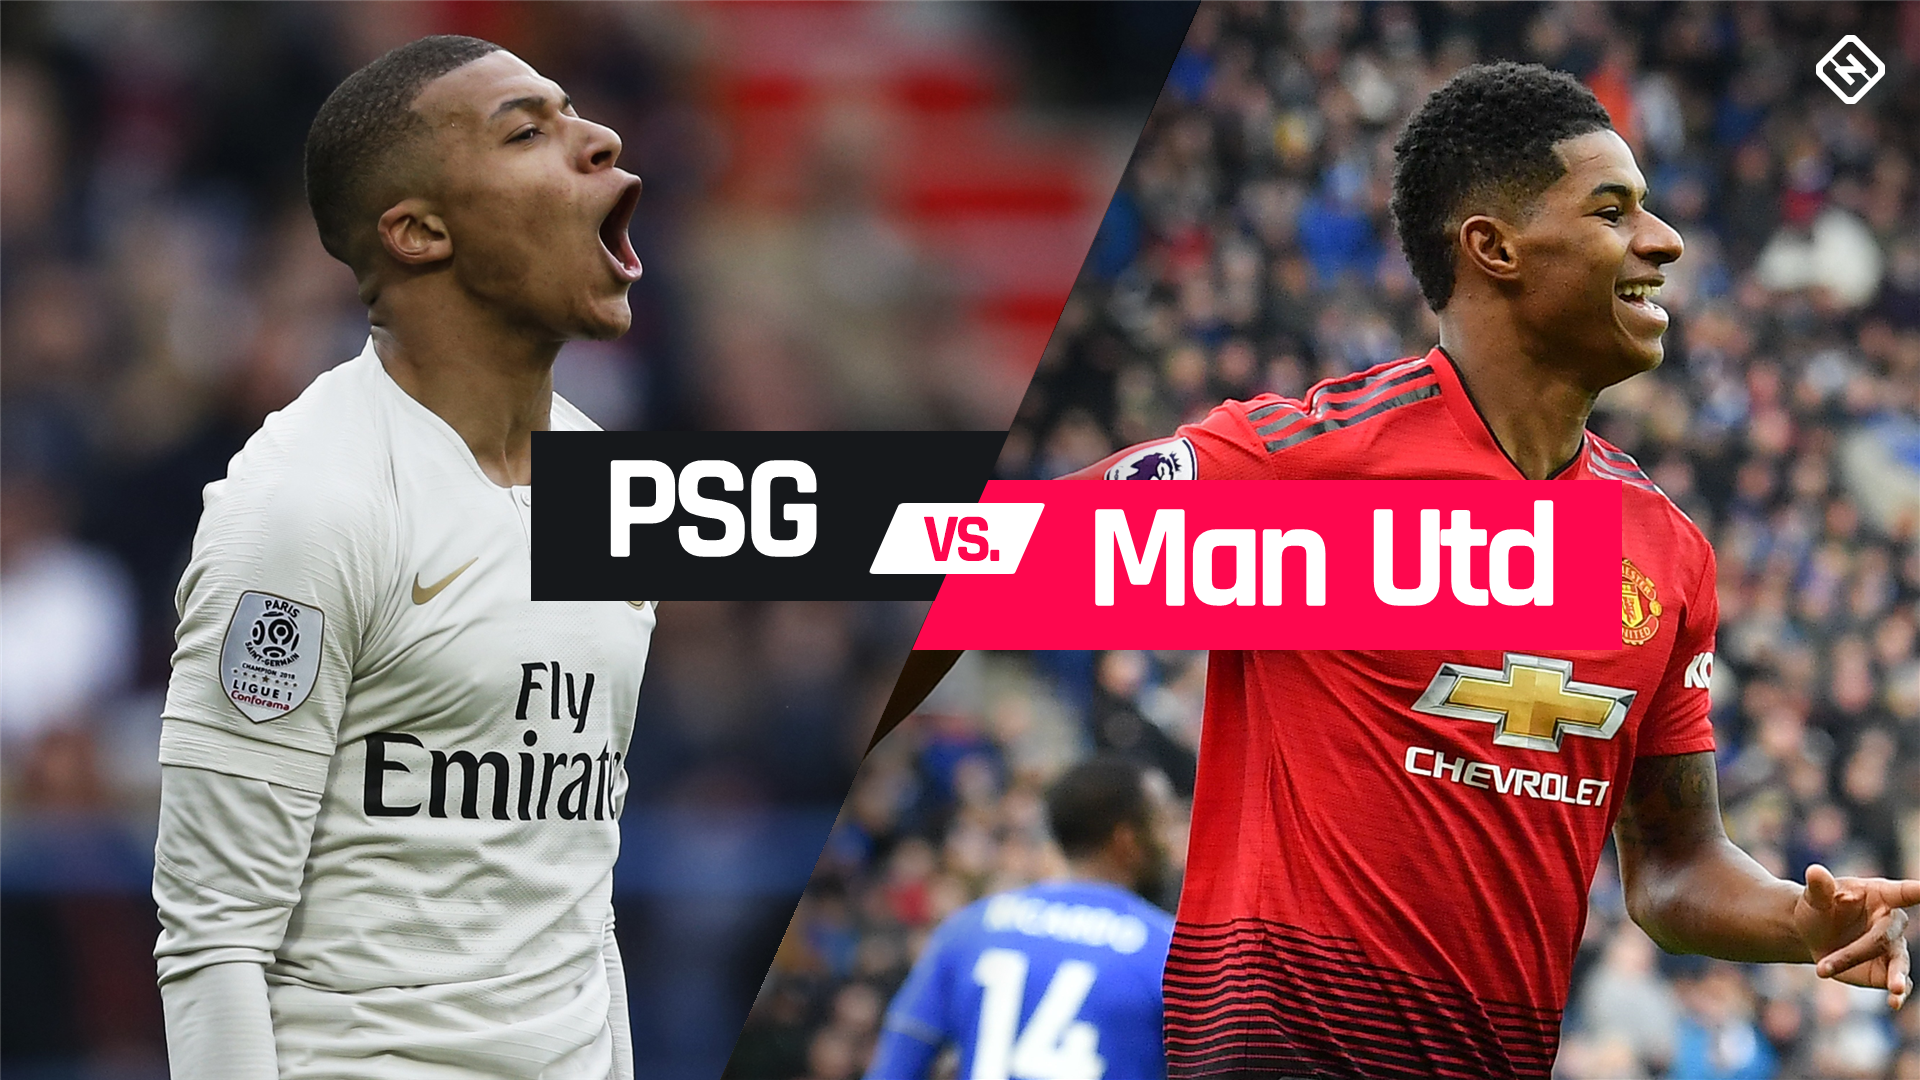 Champions League: How to watch PSG vs. Manchester United live in Canada